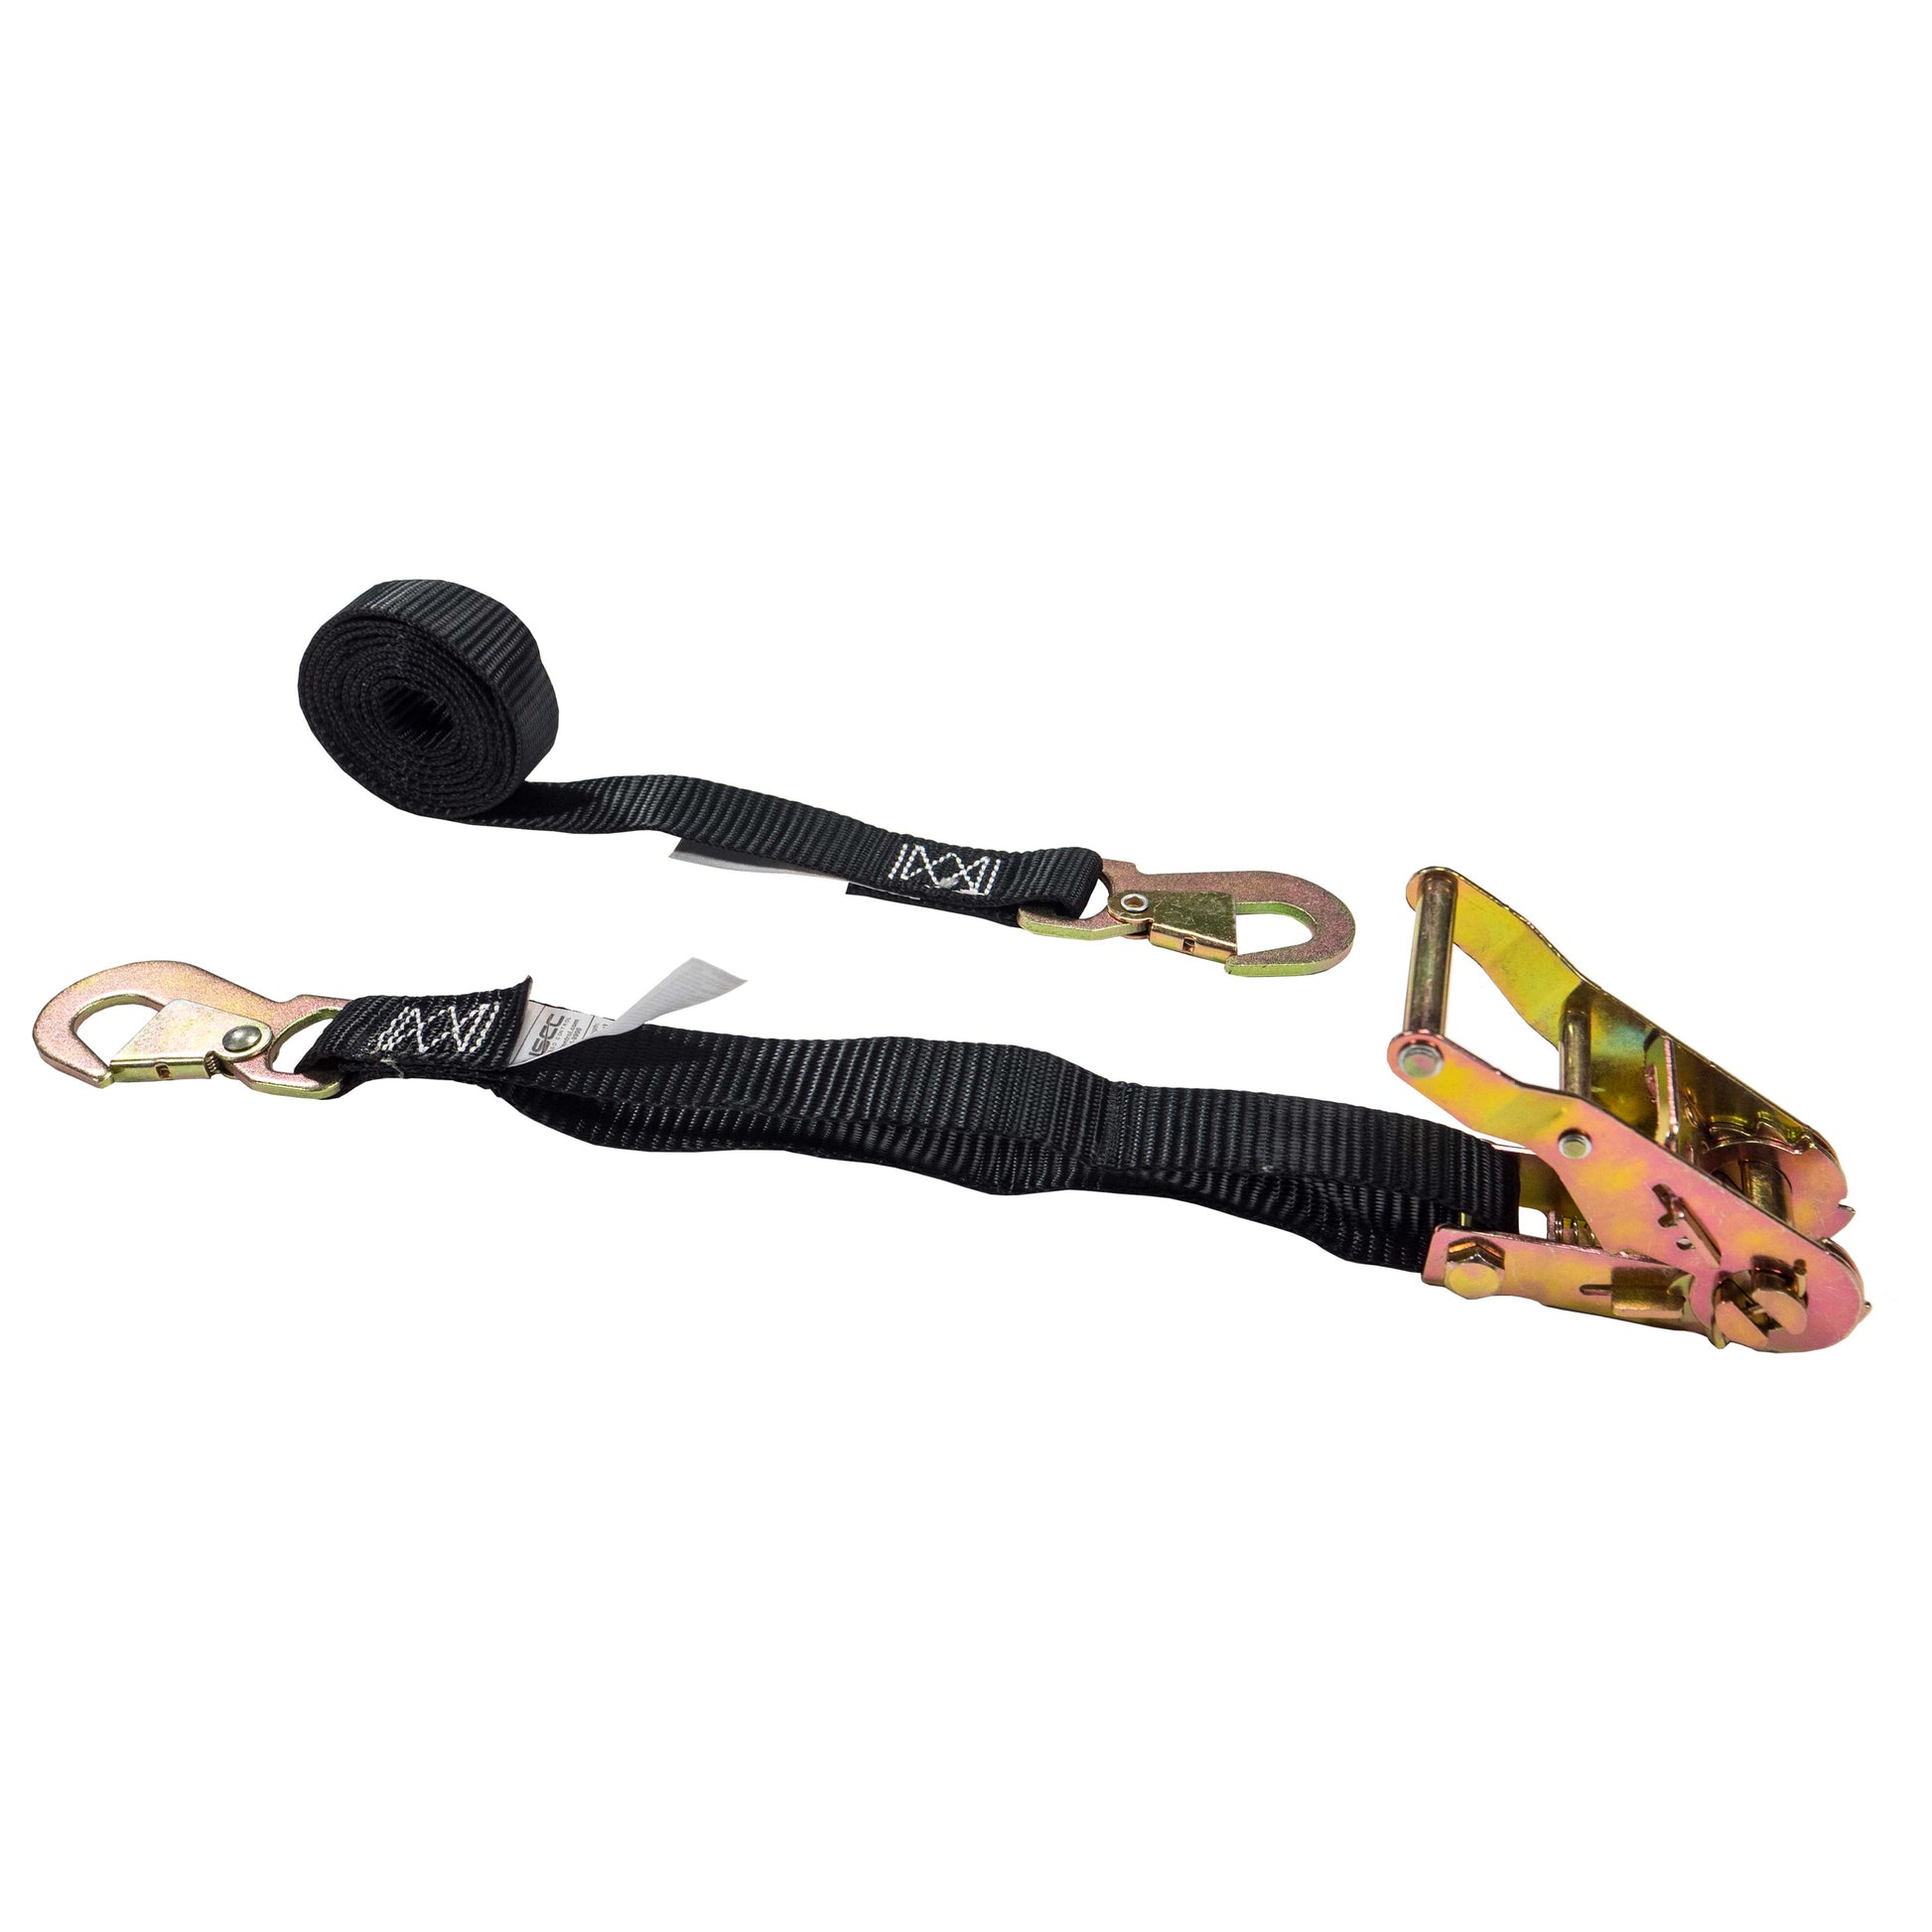 1 x 10' Retractable Ratchet Straps w/ Soft Loops 2 Pack